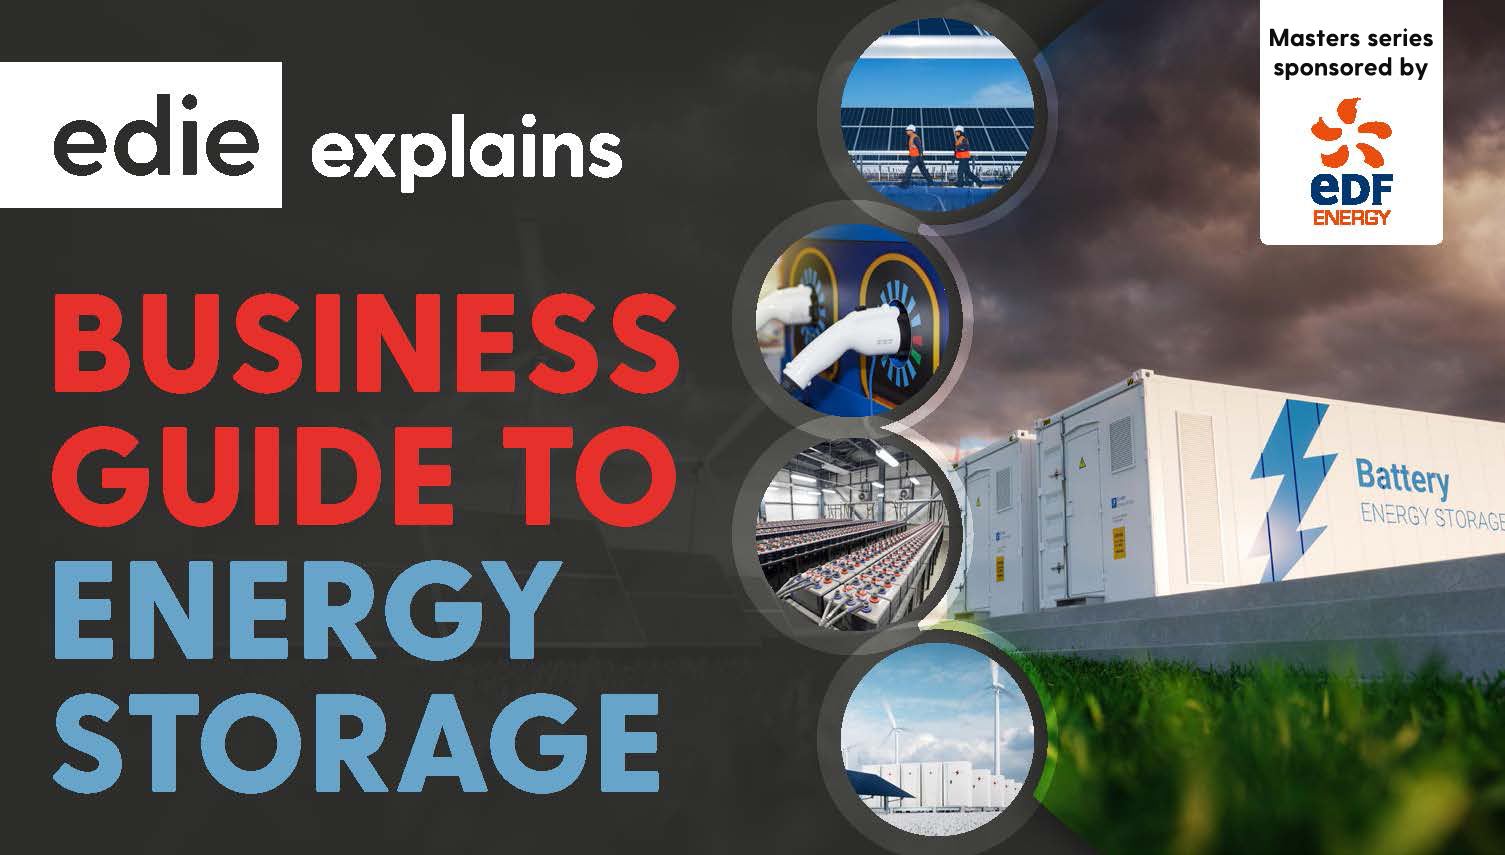 The business guide to energy storage - edie.net